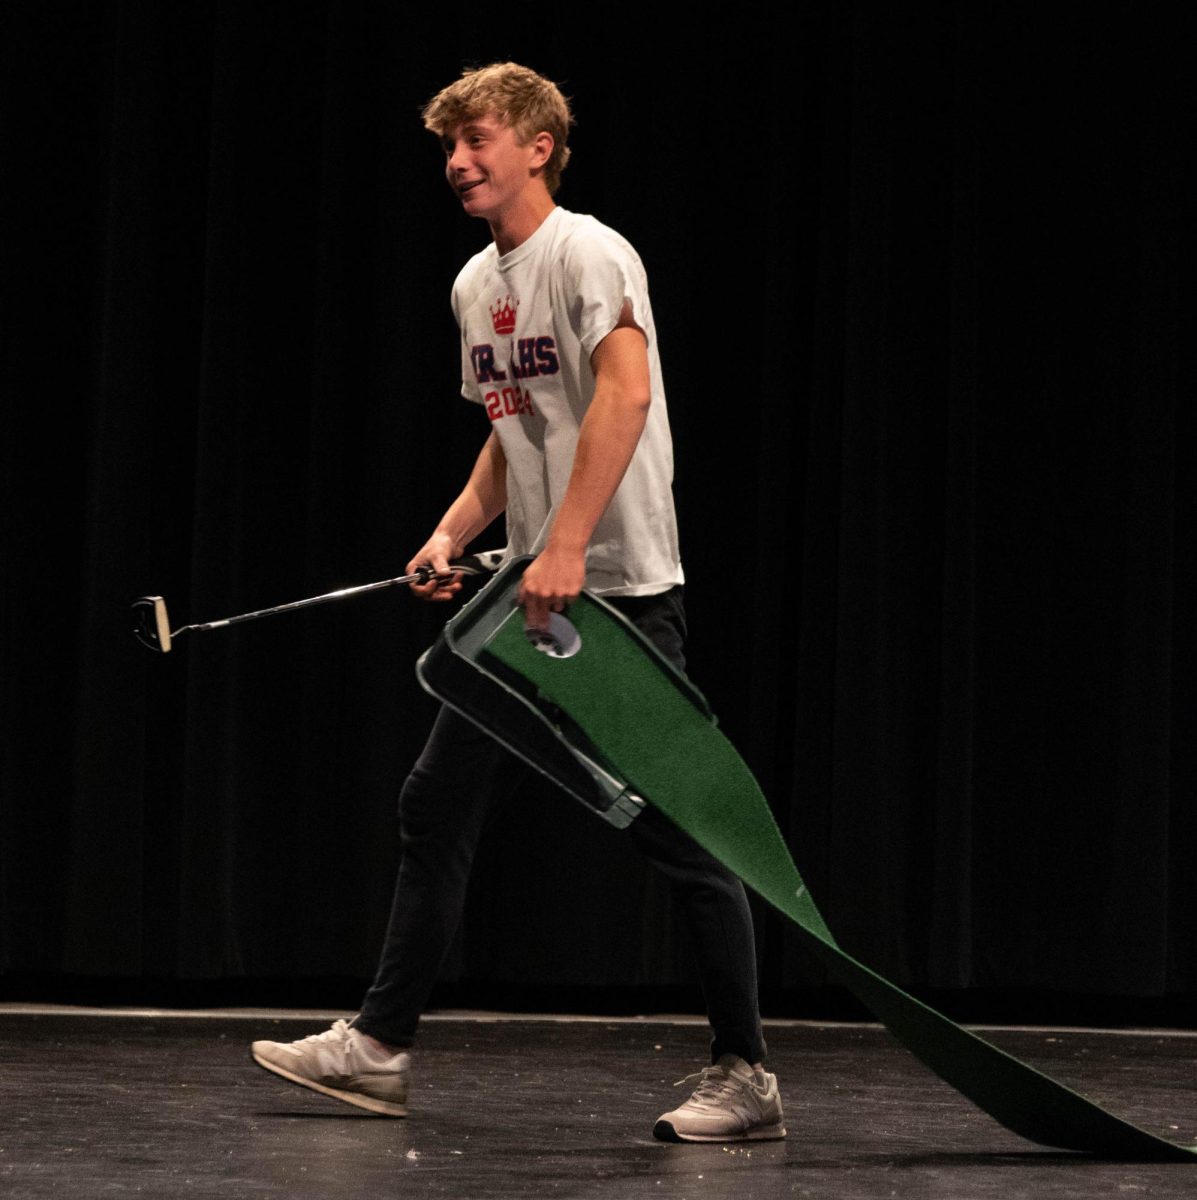 Jack Gnandt walking off stage after showing off his golfing skills for the talent show segment.